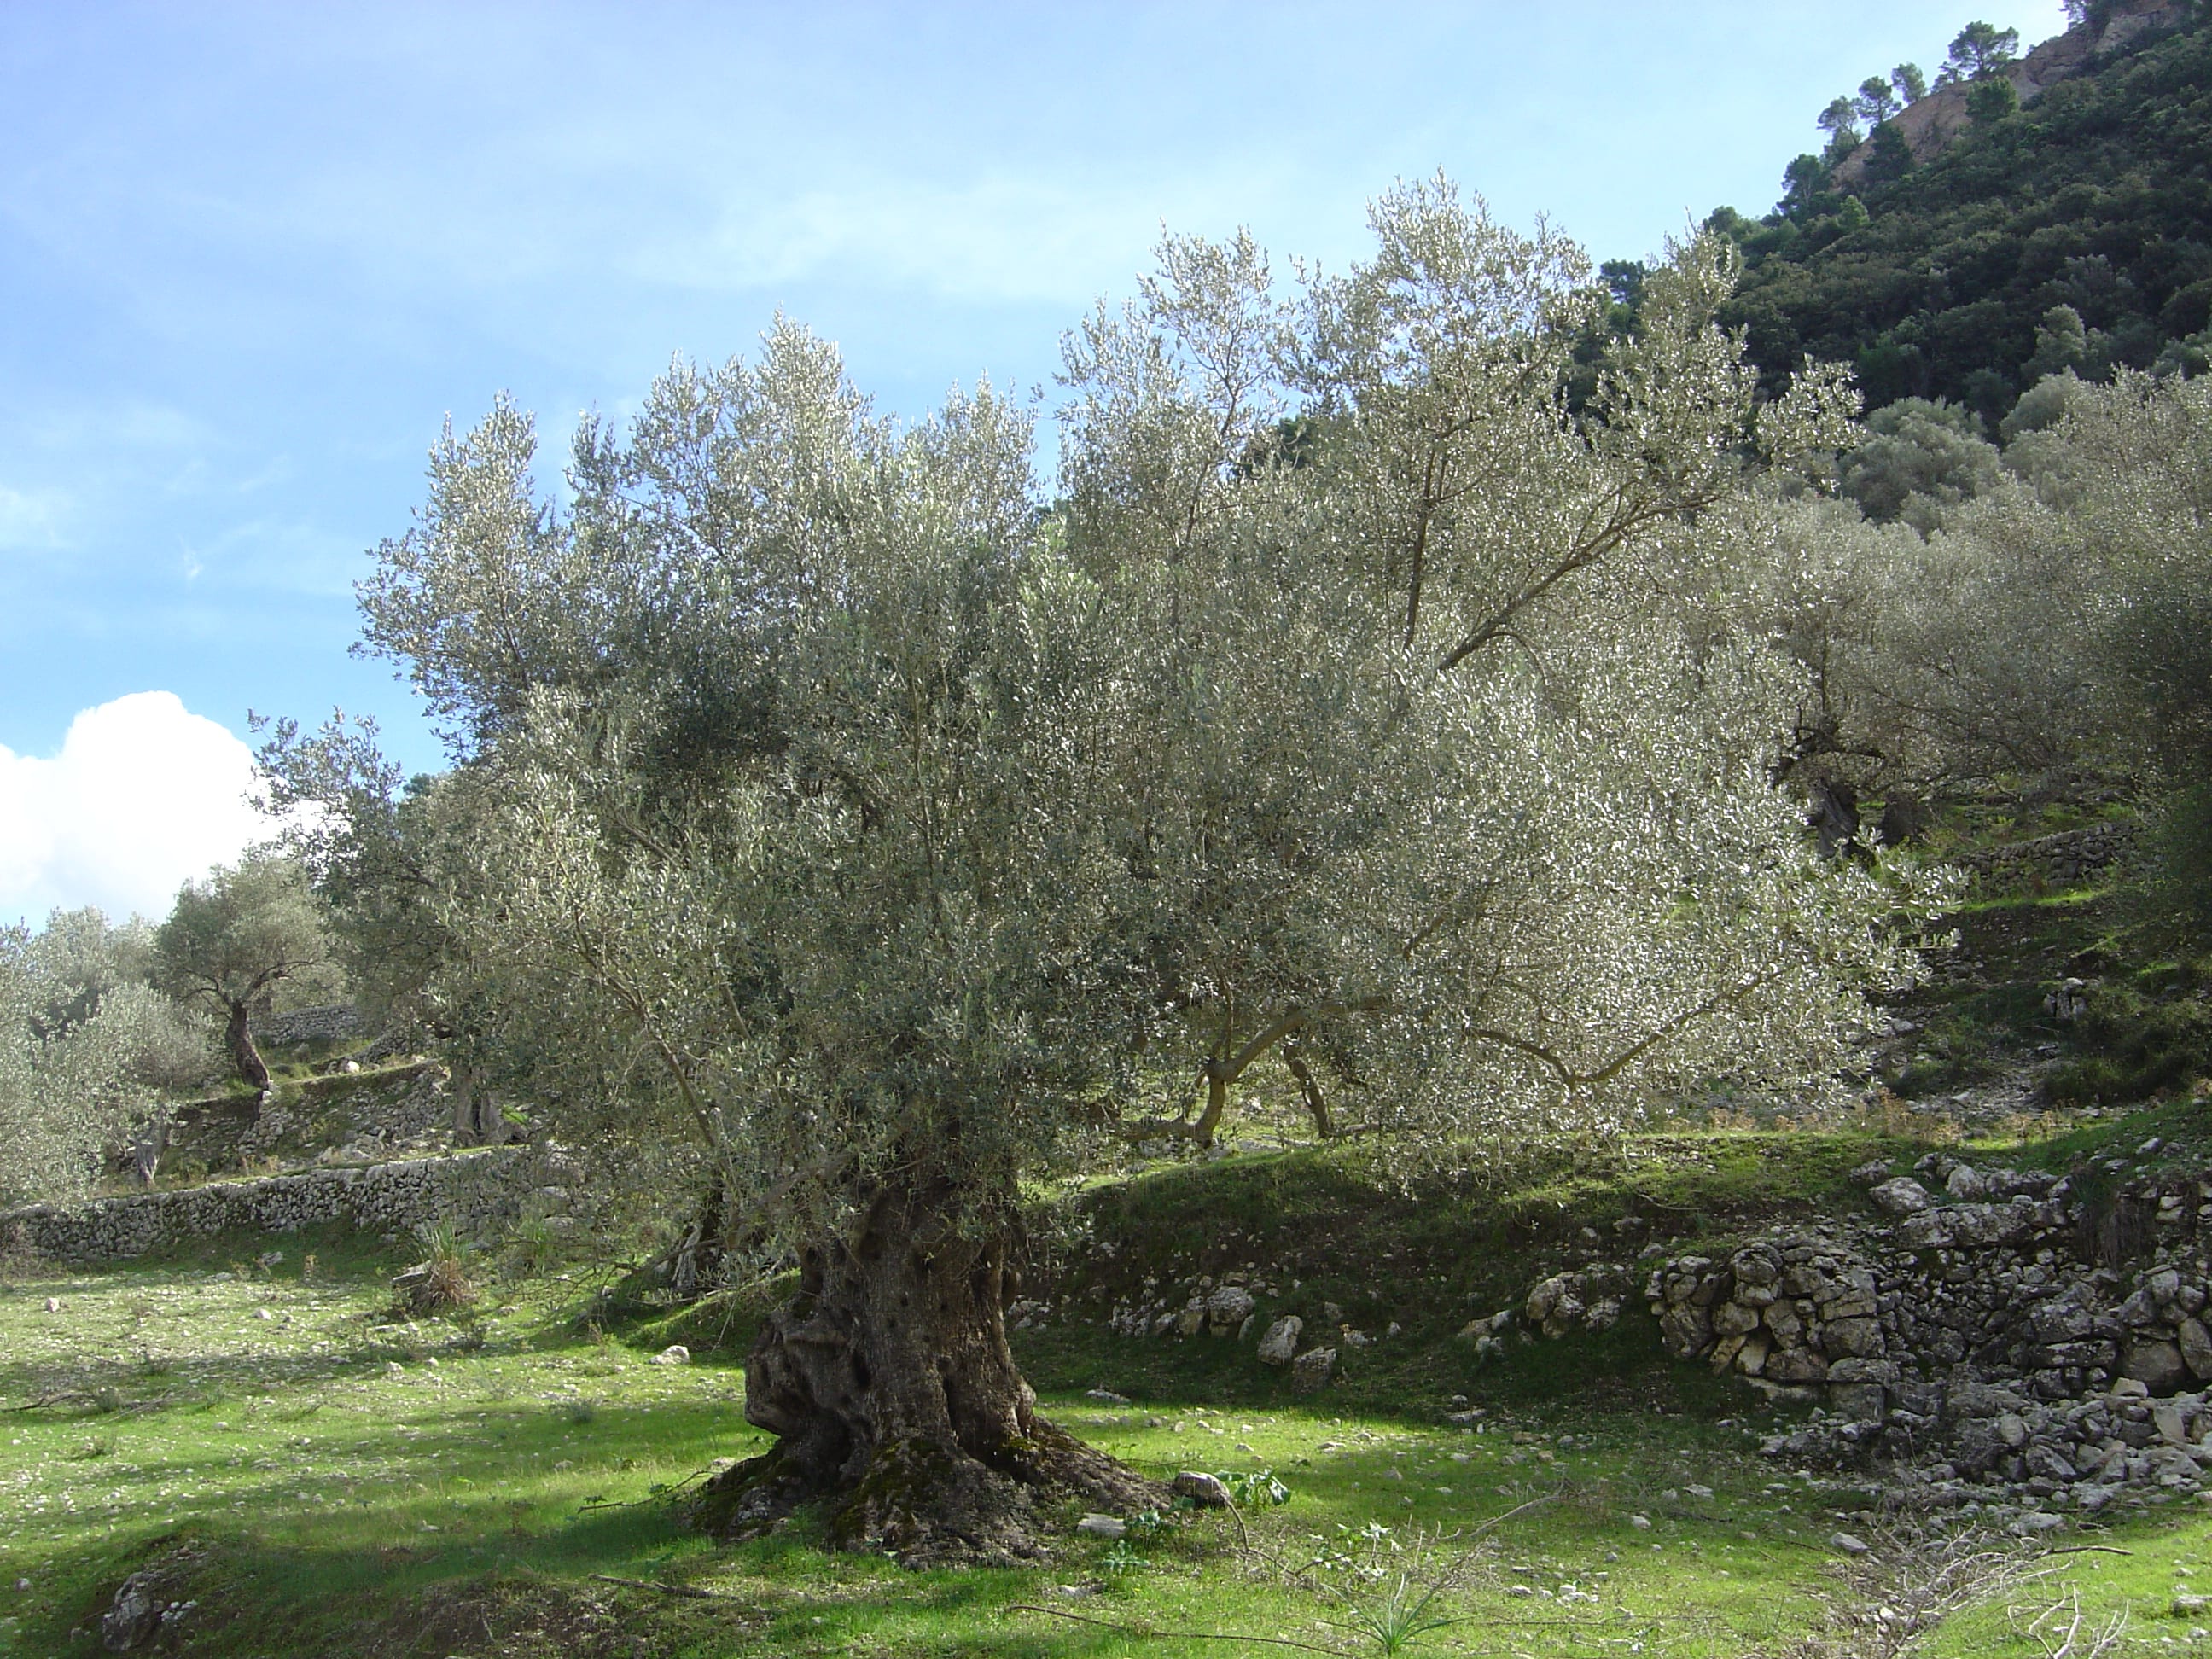 How long does an olive tree live?